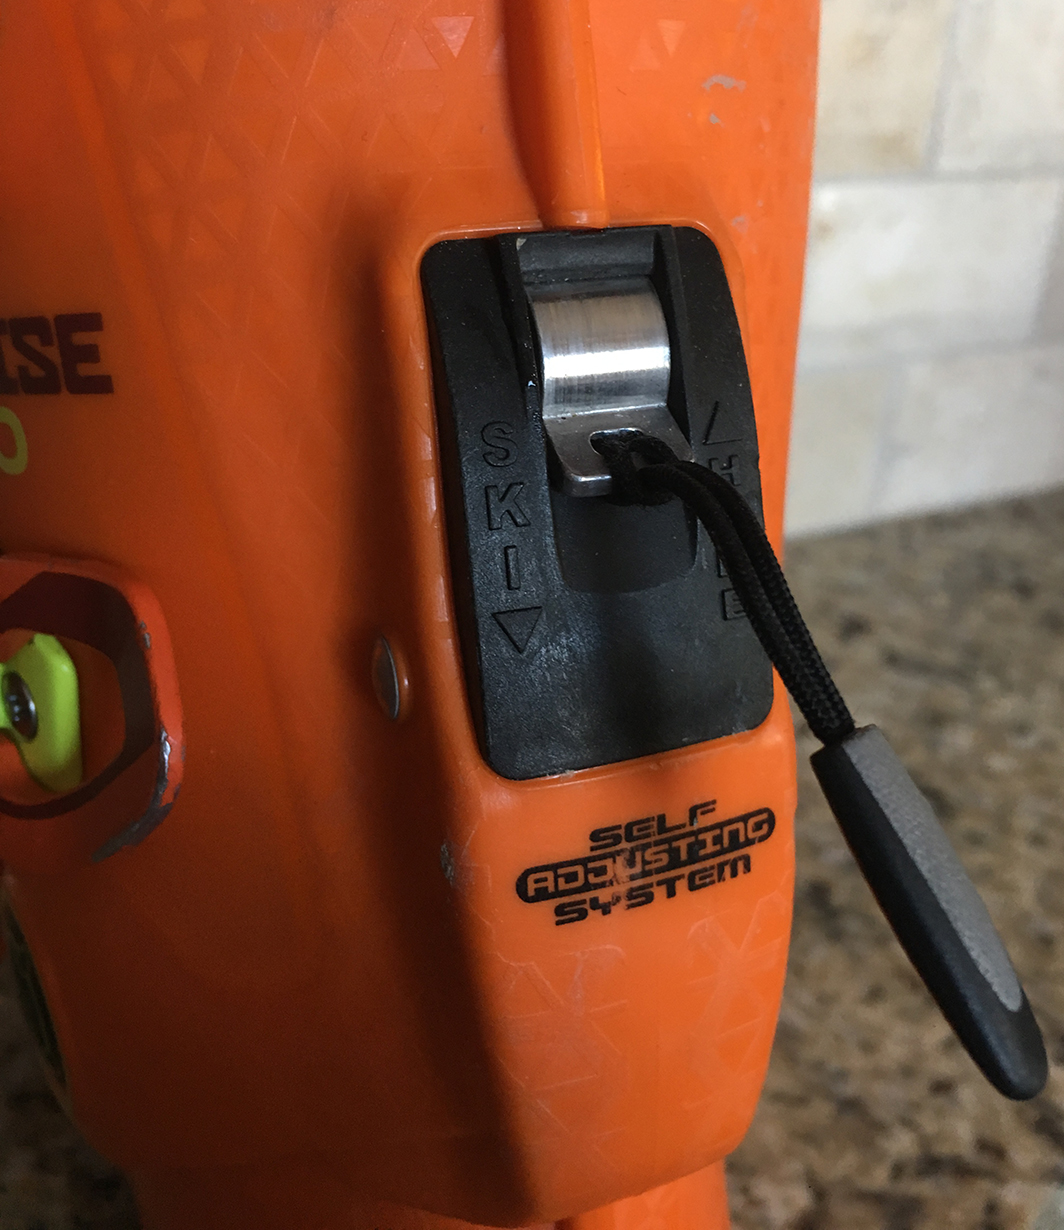 Brian Lindahl reviews the Tecnica Cochise 130 Pro for Blister Gear Review